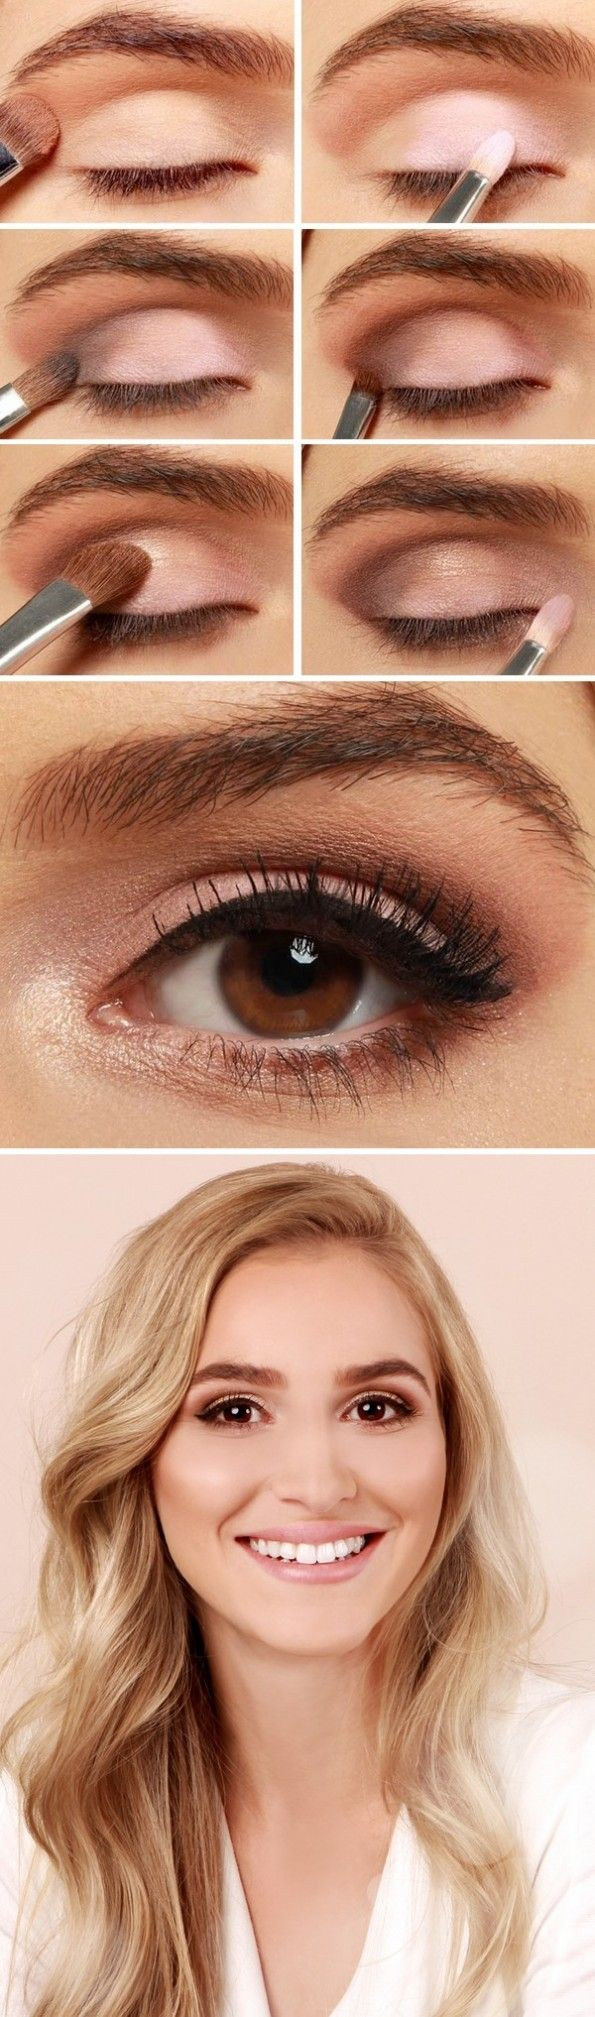 How To Do Eye Makeup For Brown Eyes 27 Pretty Makeup Tutorials For Brown Eyes Styles Weekly